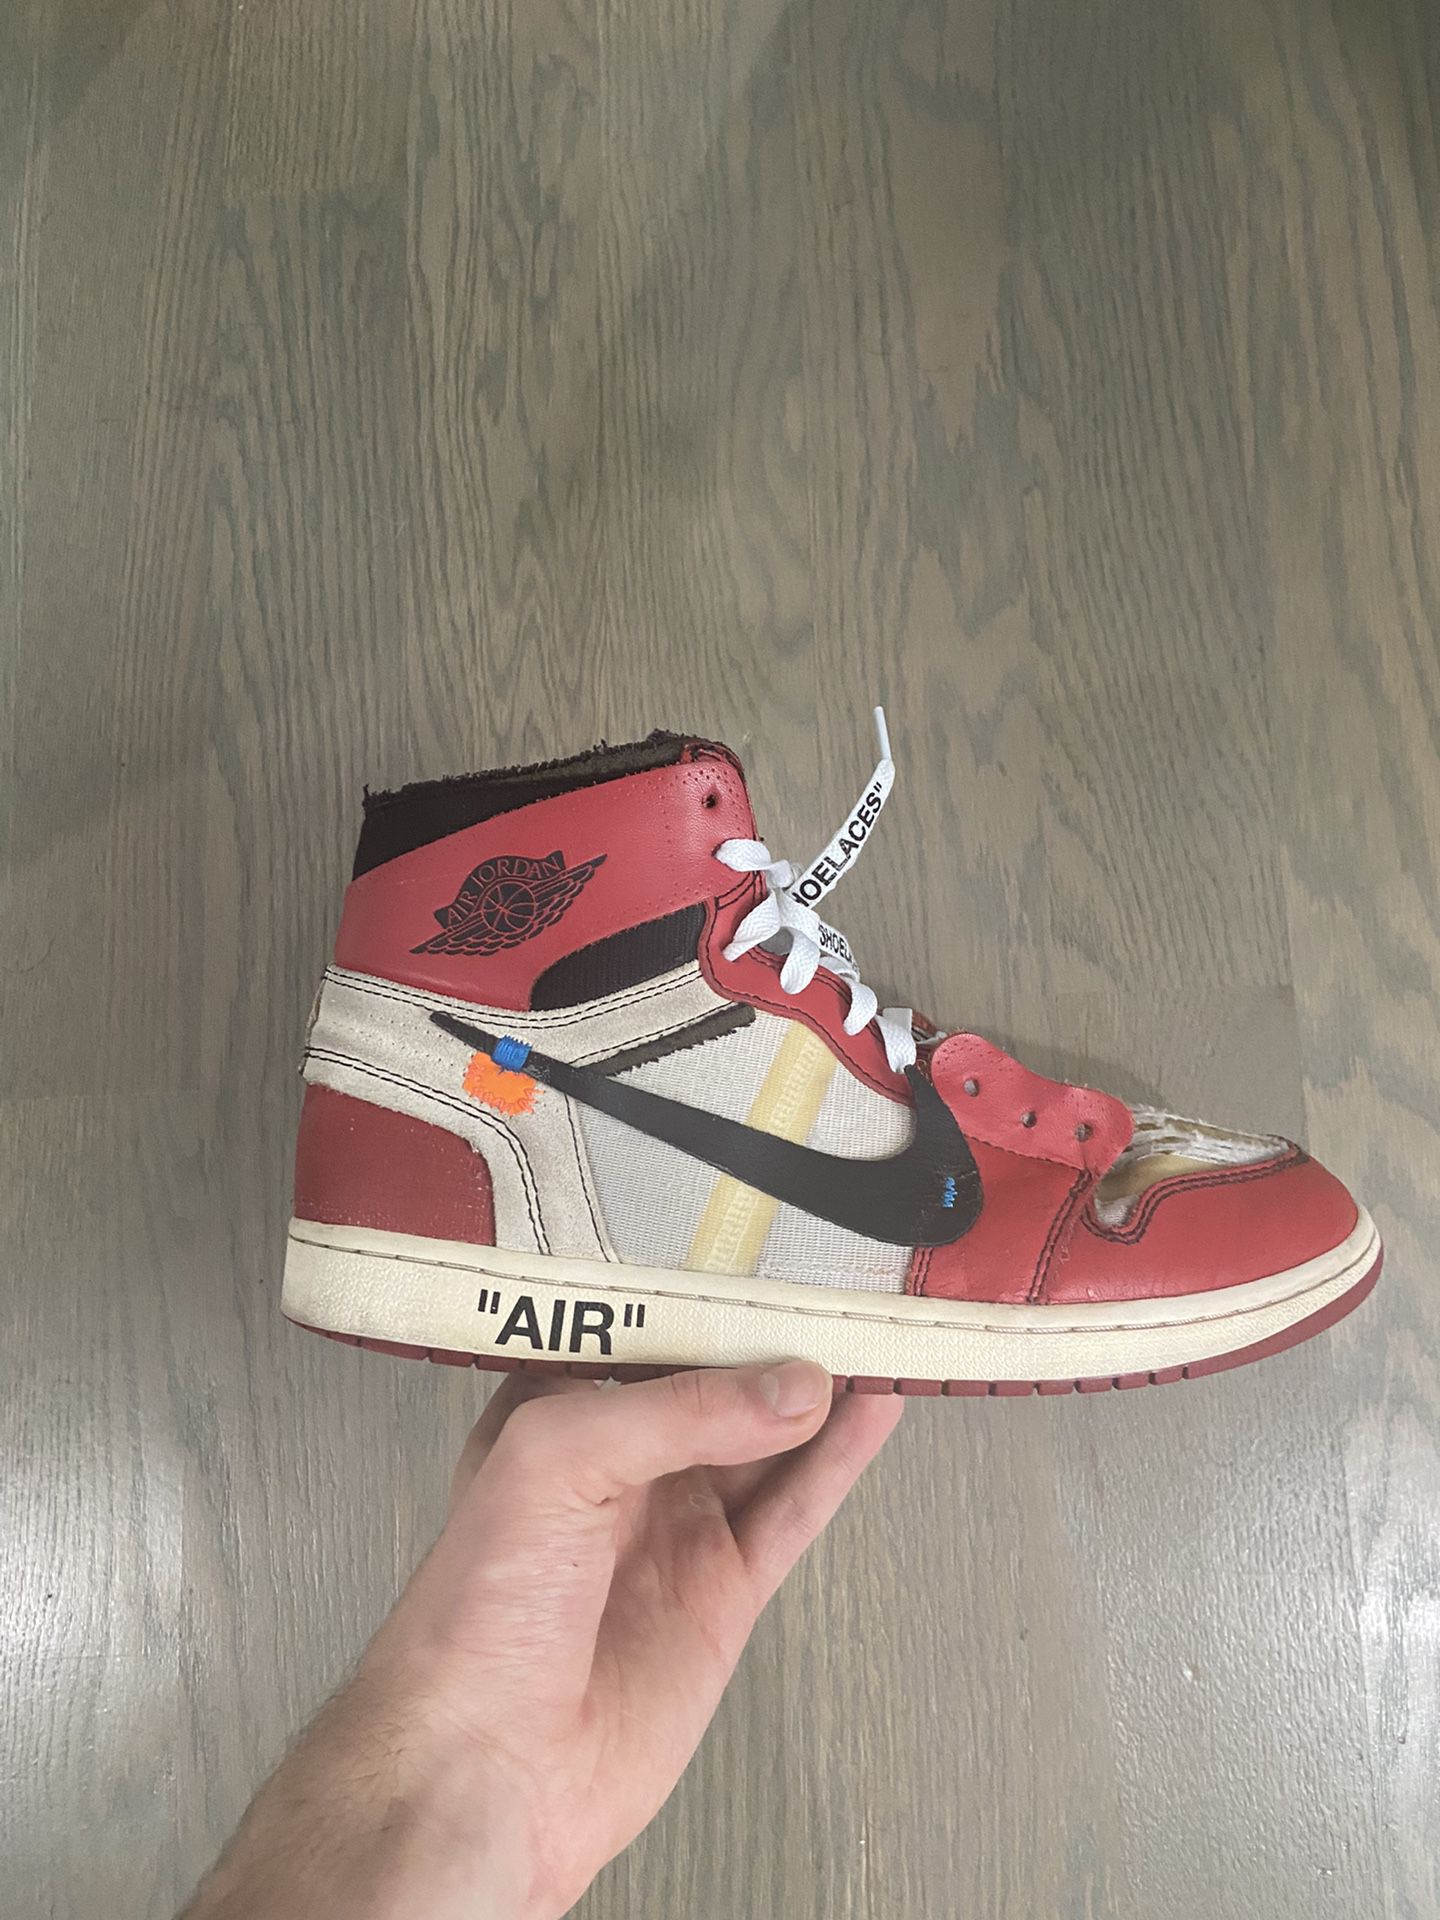 Off White Chicago Jordan 1 for Sale in Downers Grove, IL - OfferUp